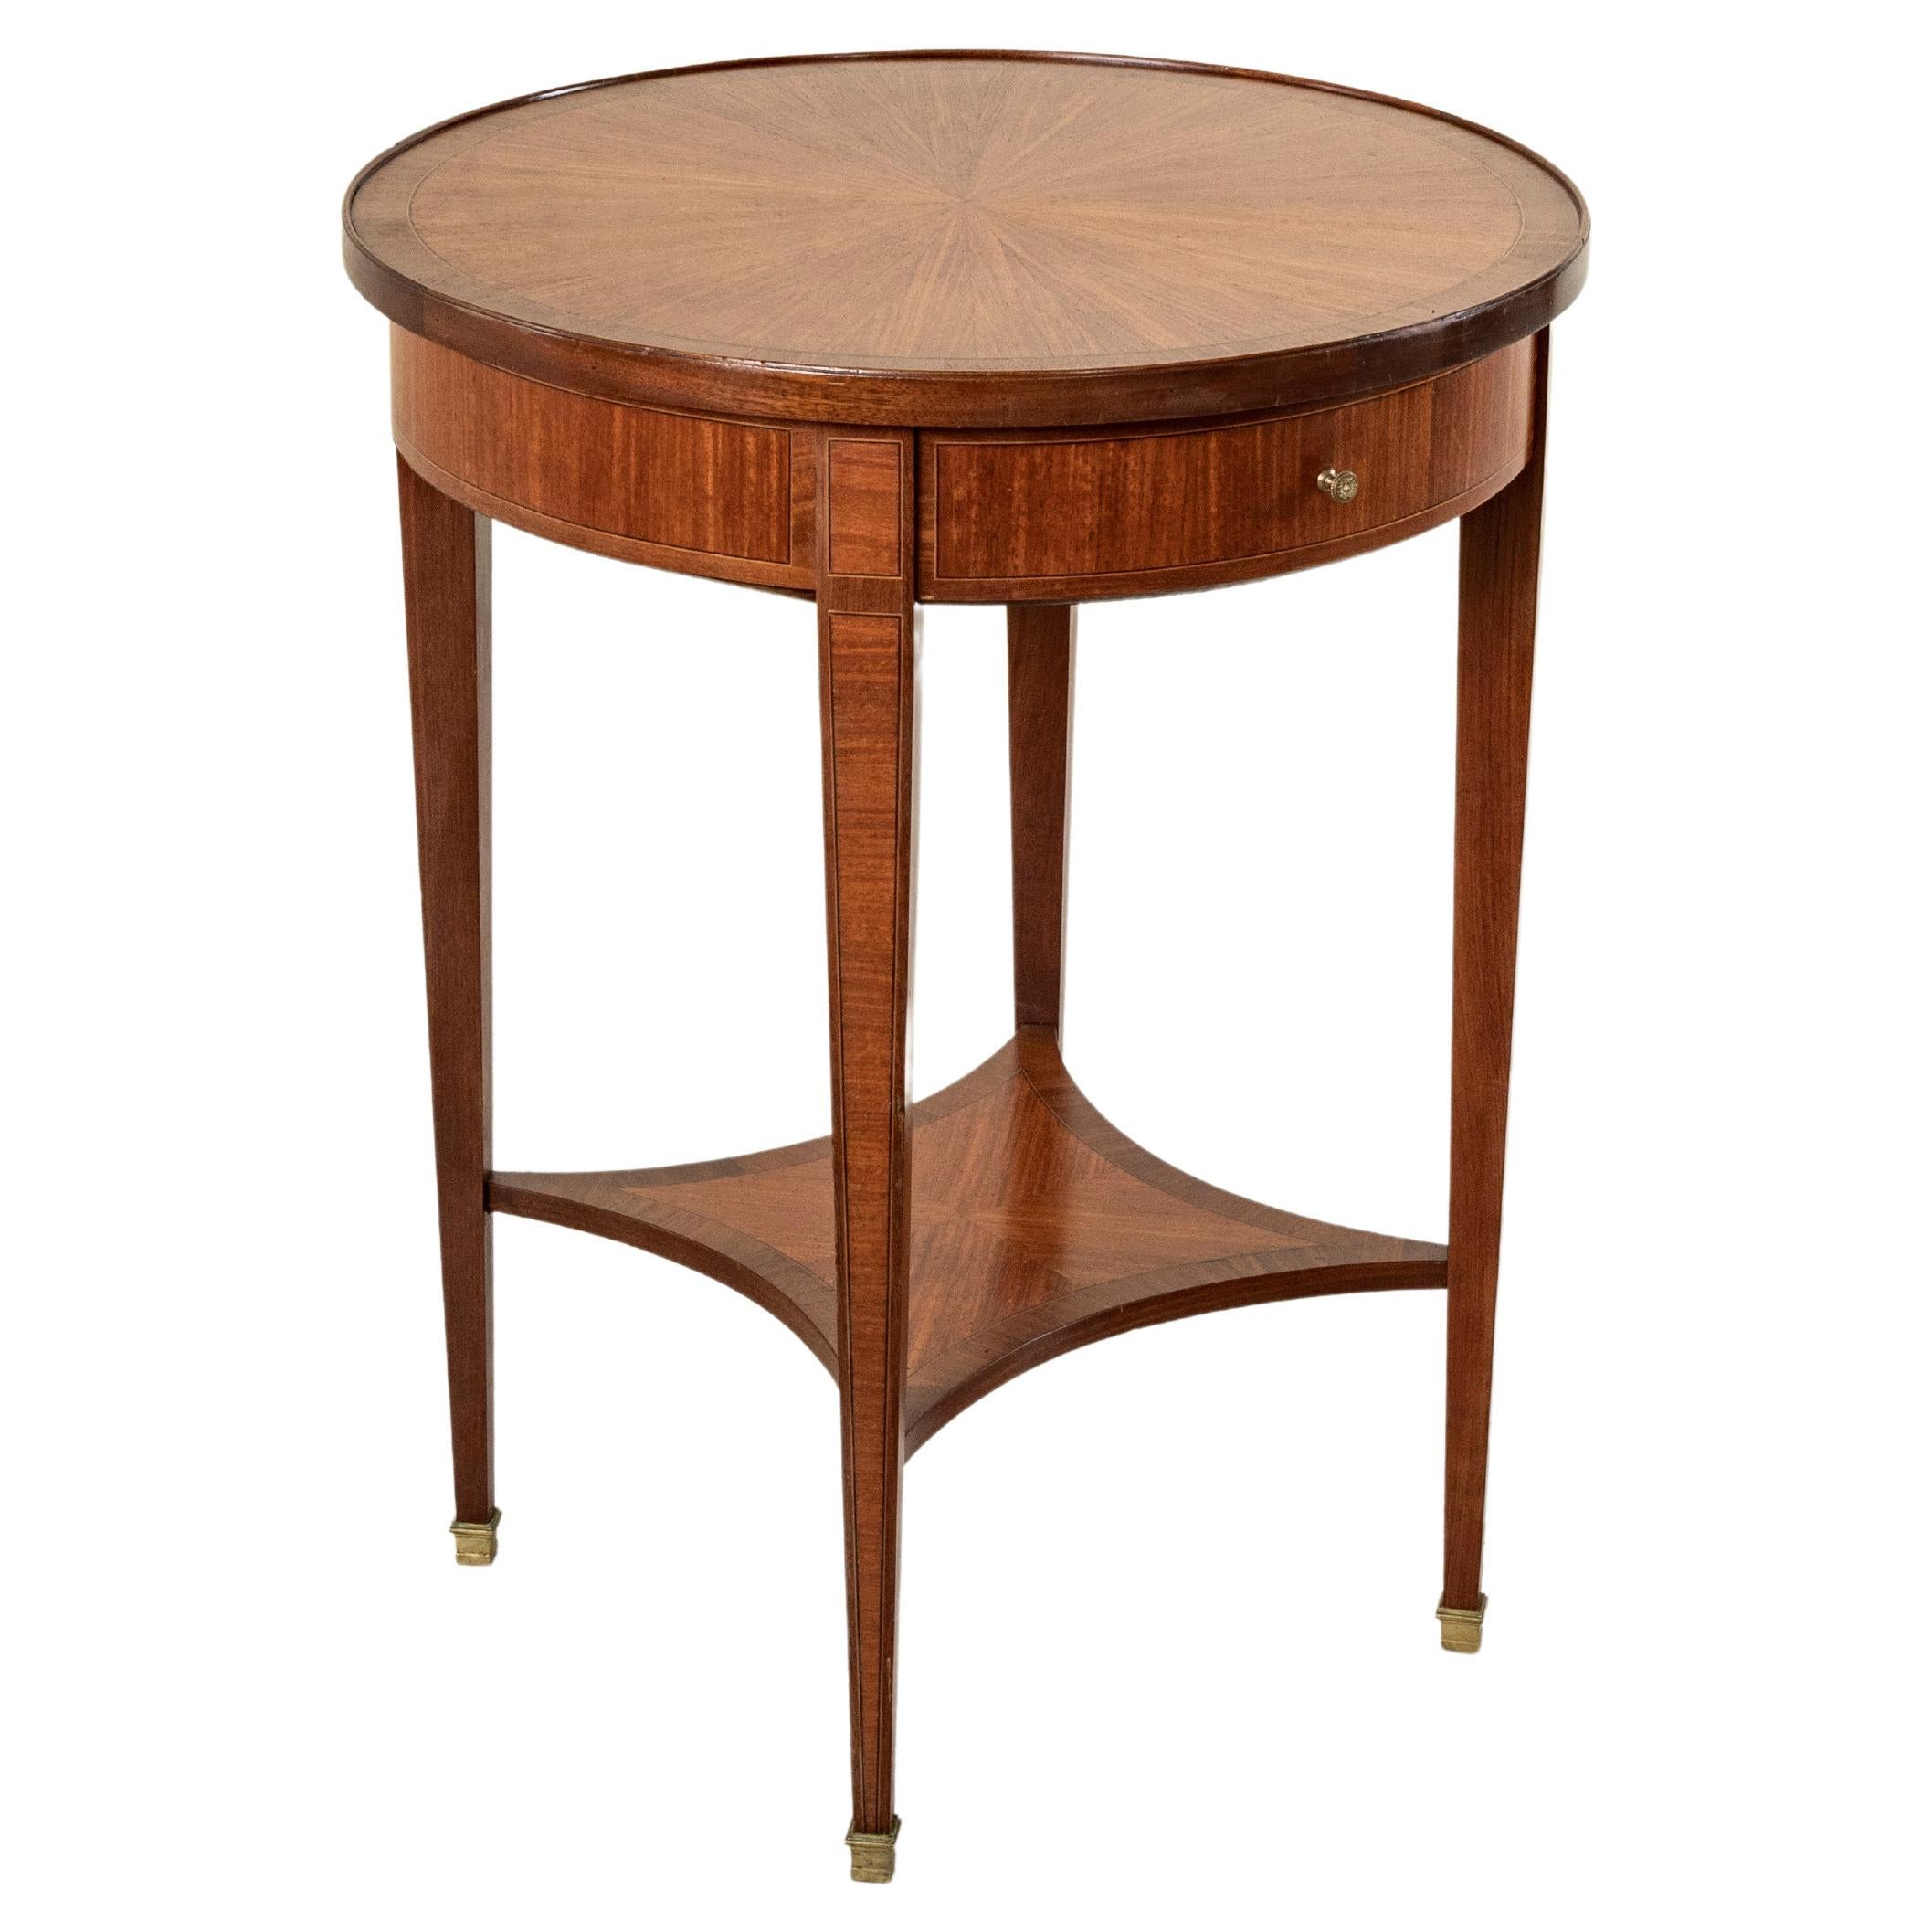 Early 20th Century French Louis XVI Style Rosewood Marquetry Side Table